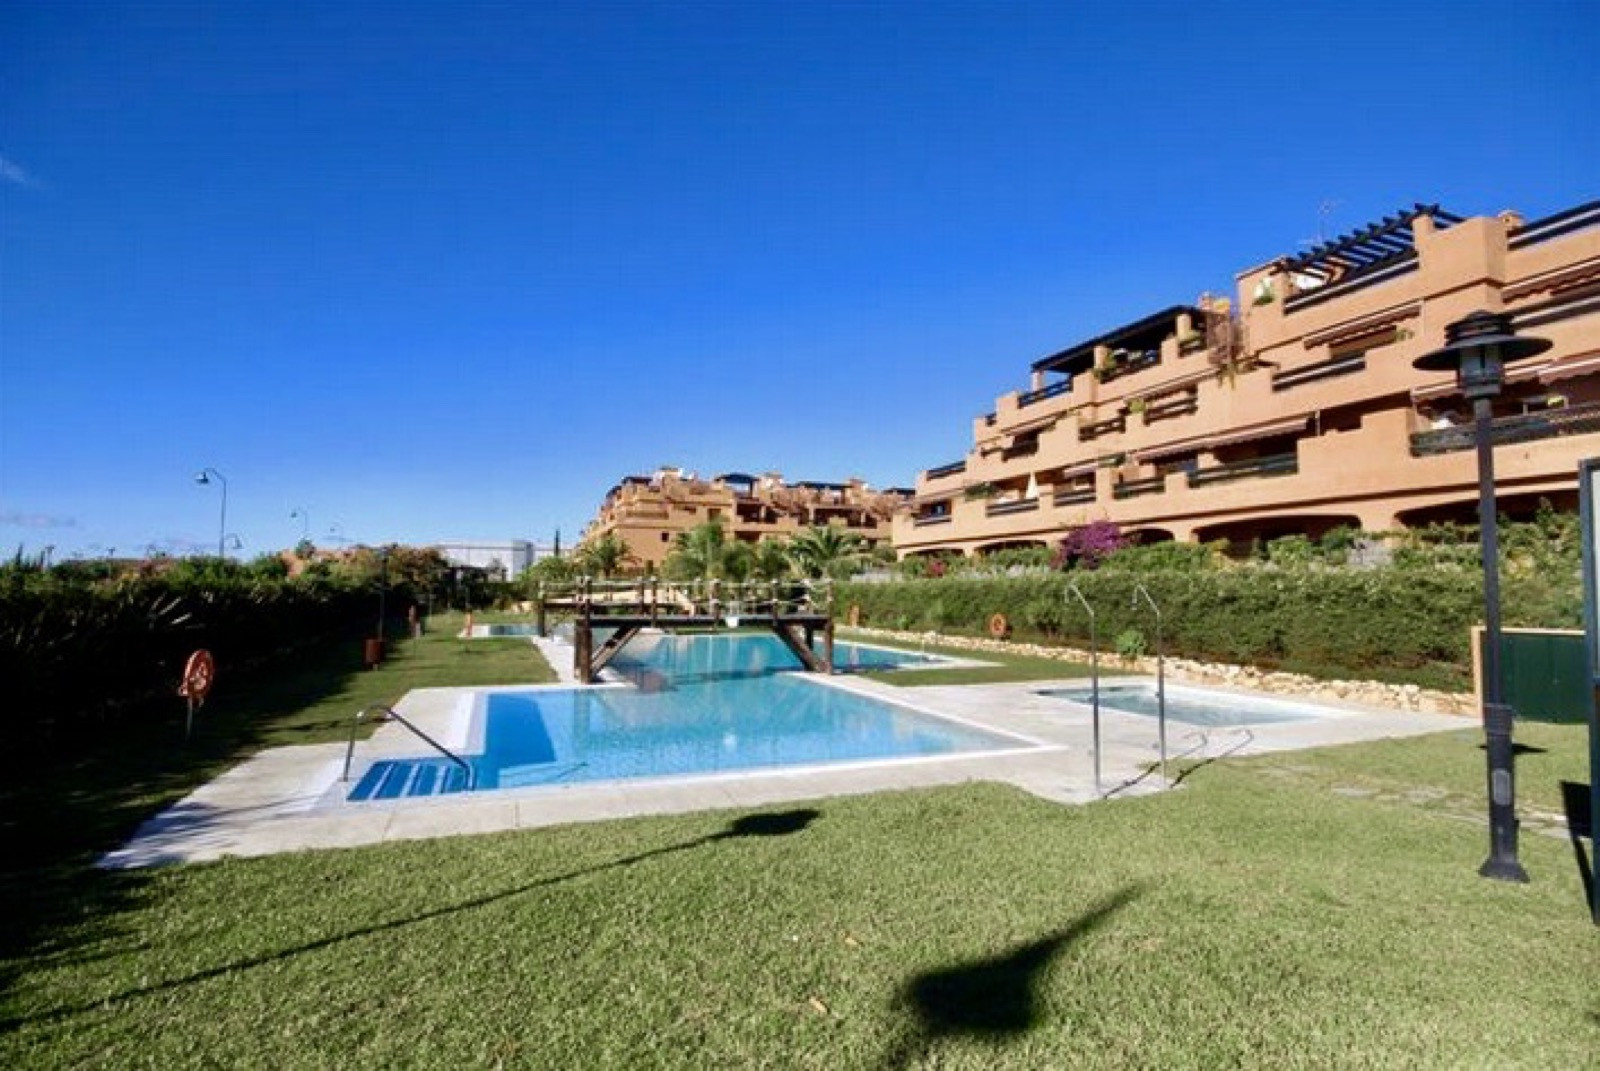 Fantastic apartment with large terrace in a private complex very close to the beach